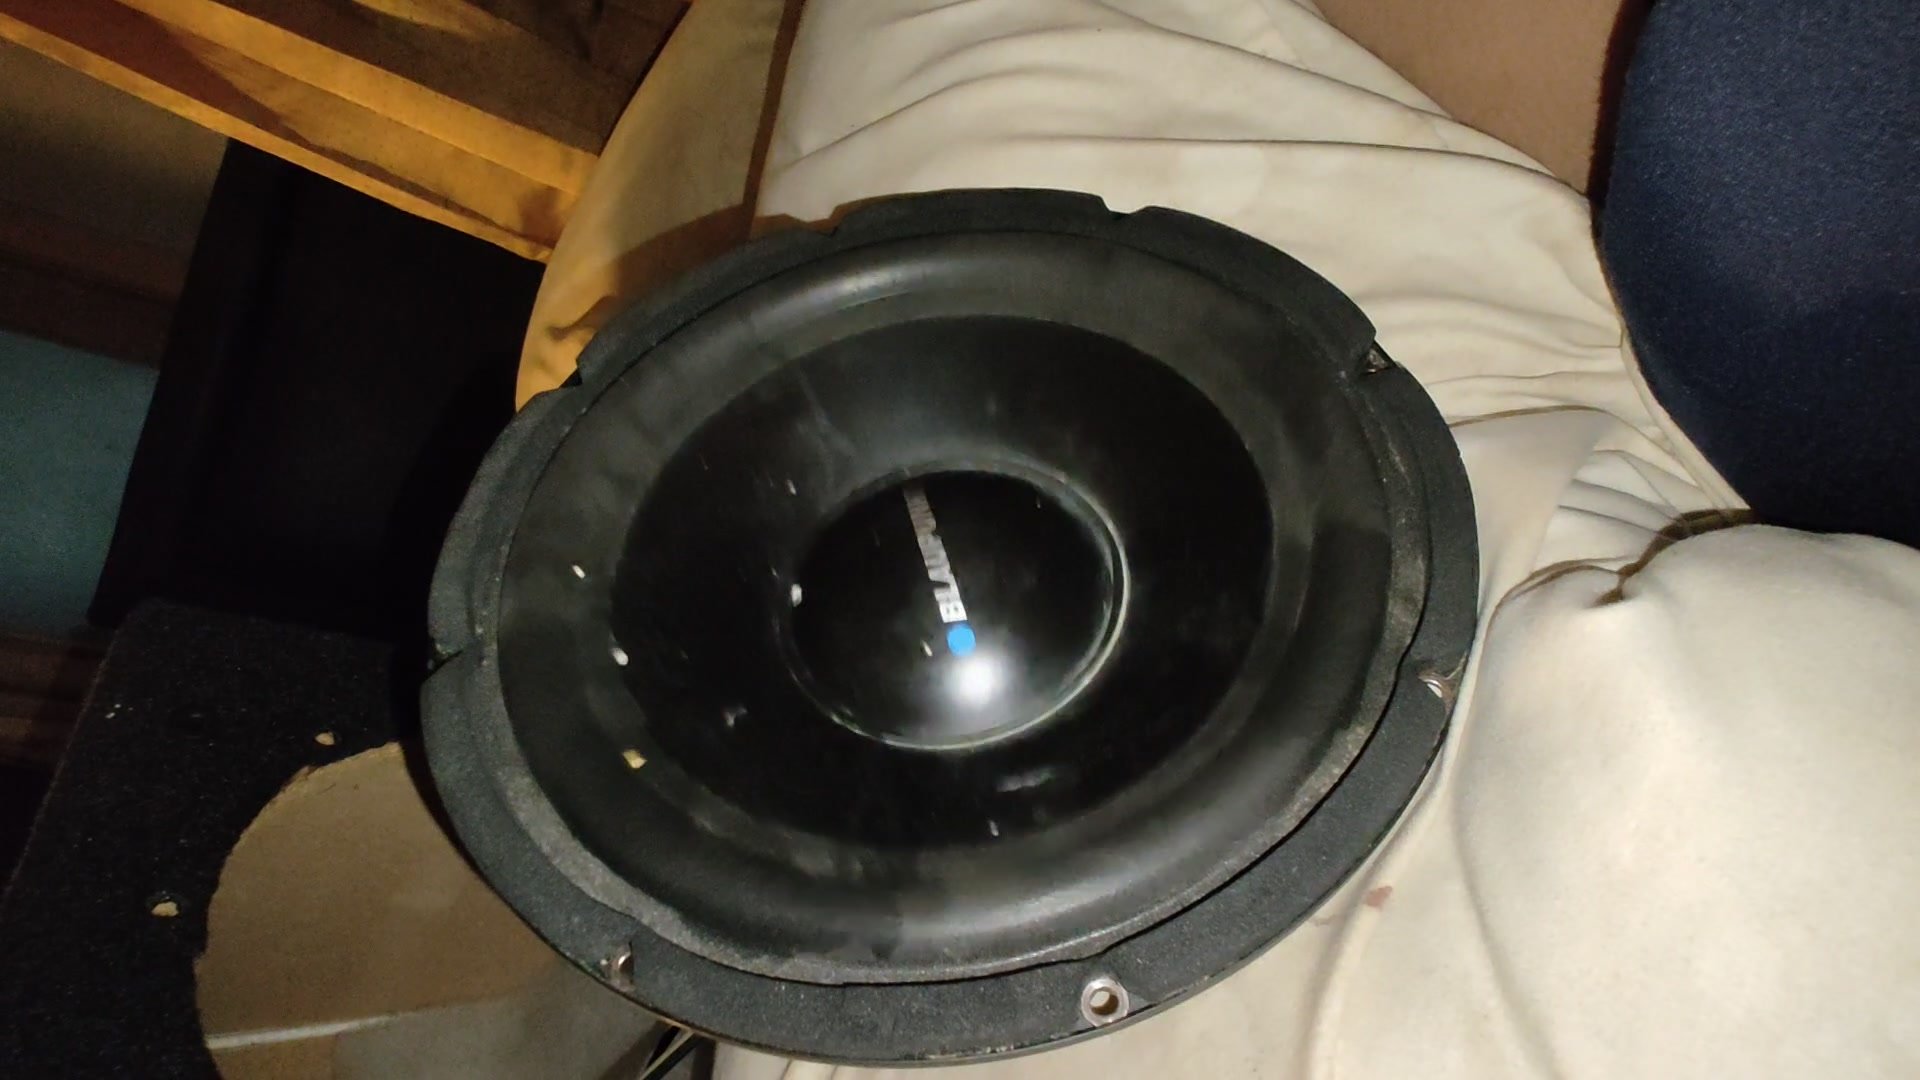 Dirty subwoofer staring at my sweaty buldge